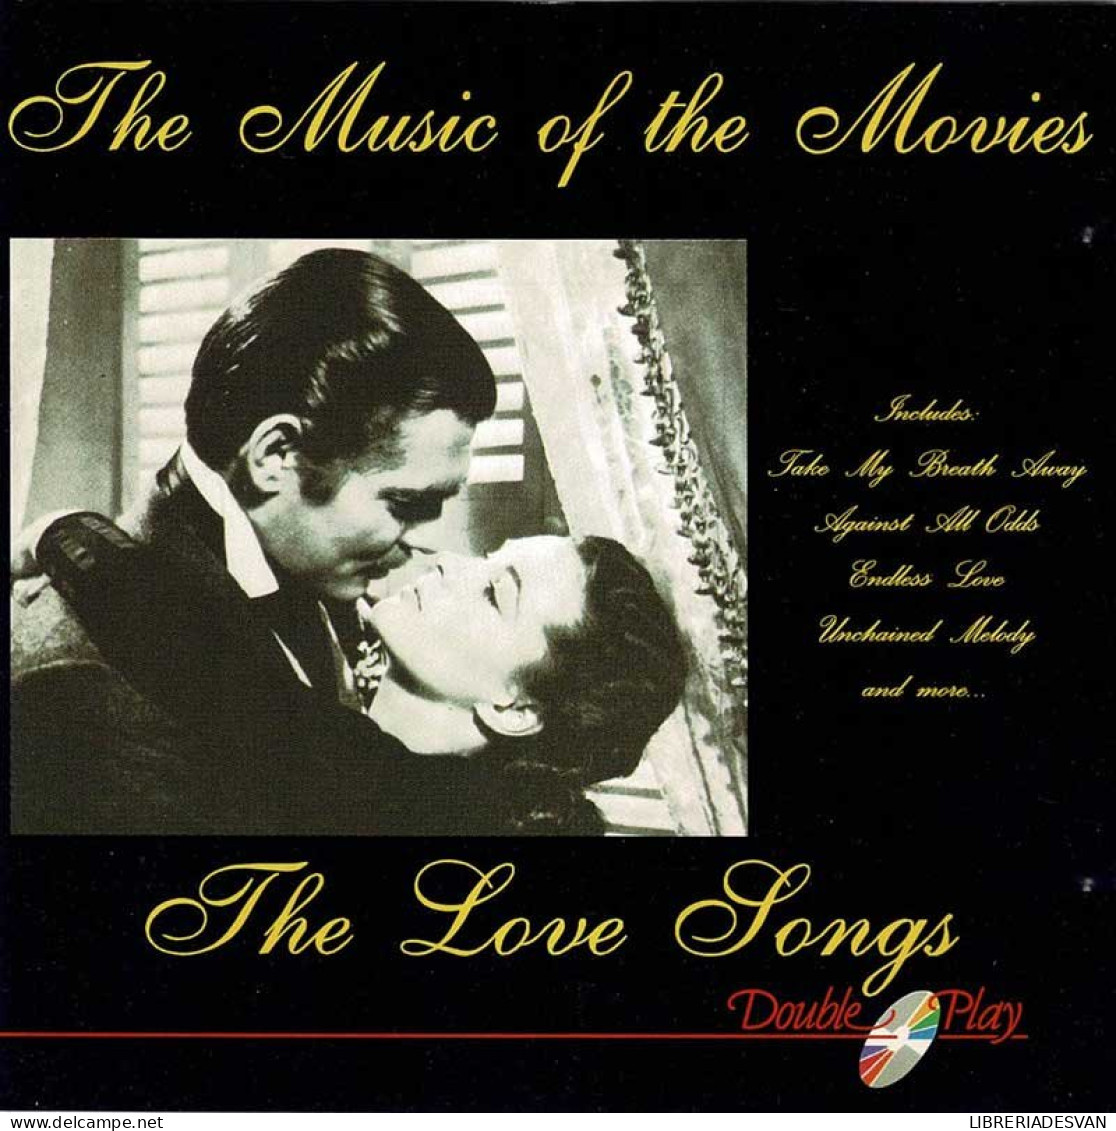 The Starlight Orchestra & Singers - The Music Of The Movies - The Love Songs. CD - Soundtracks, Film Music